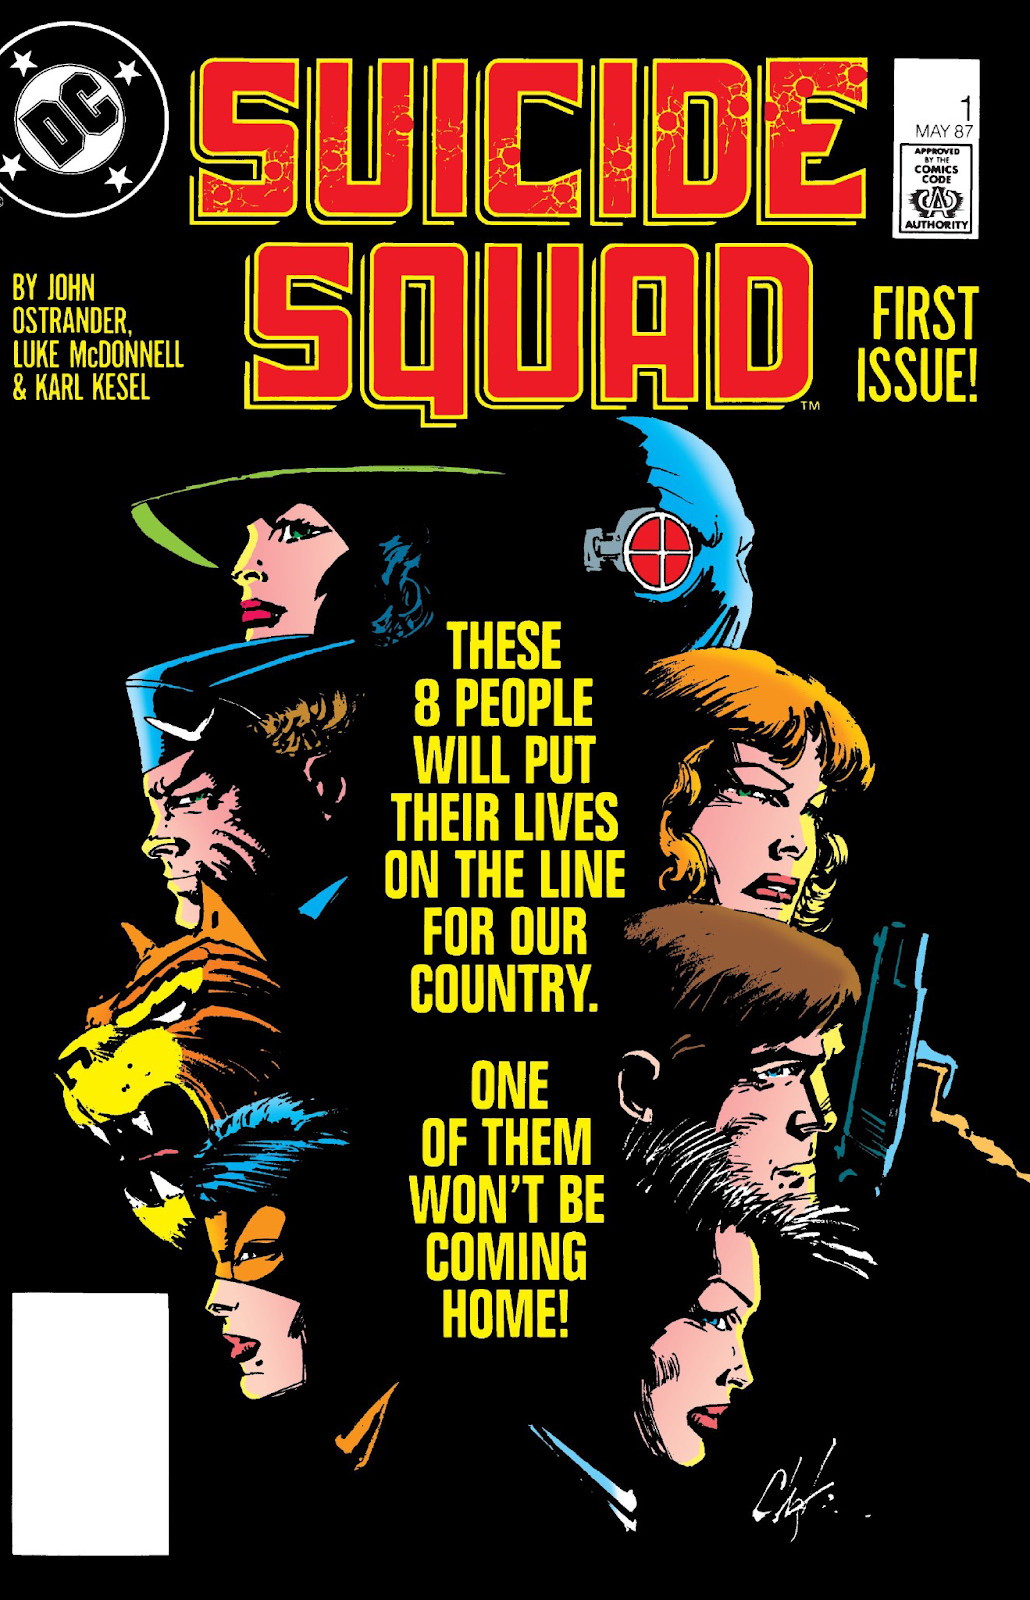 Image: The eight members of the Suicide Squad in darkly-lit profile on the cover of Suicide Squad #1 (1987). Block text in the center of the image reads: “These 8 people will put their lives on the line for our country. One of them won’t becoming home!”